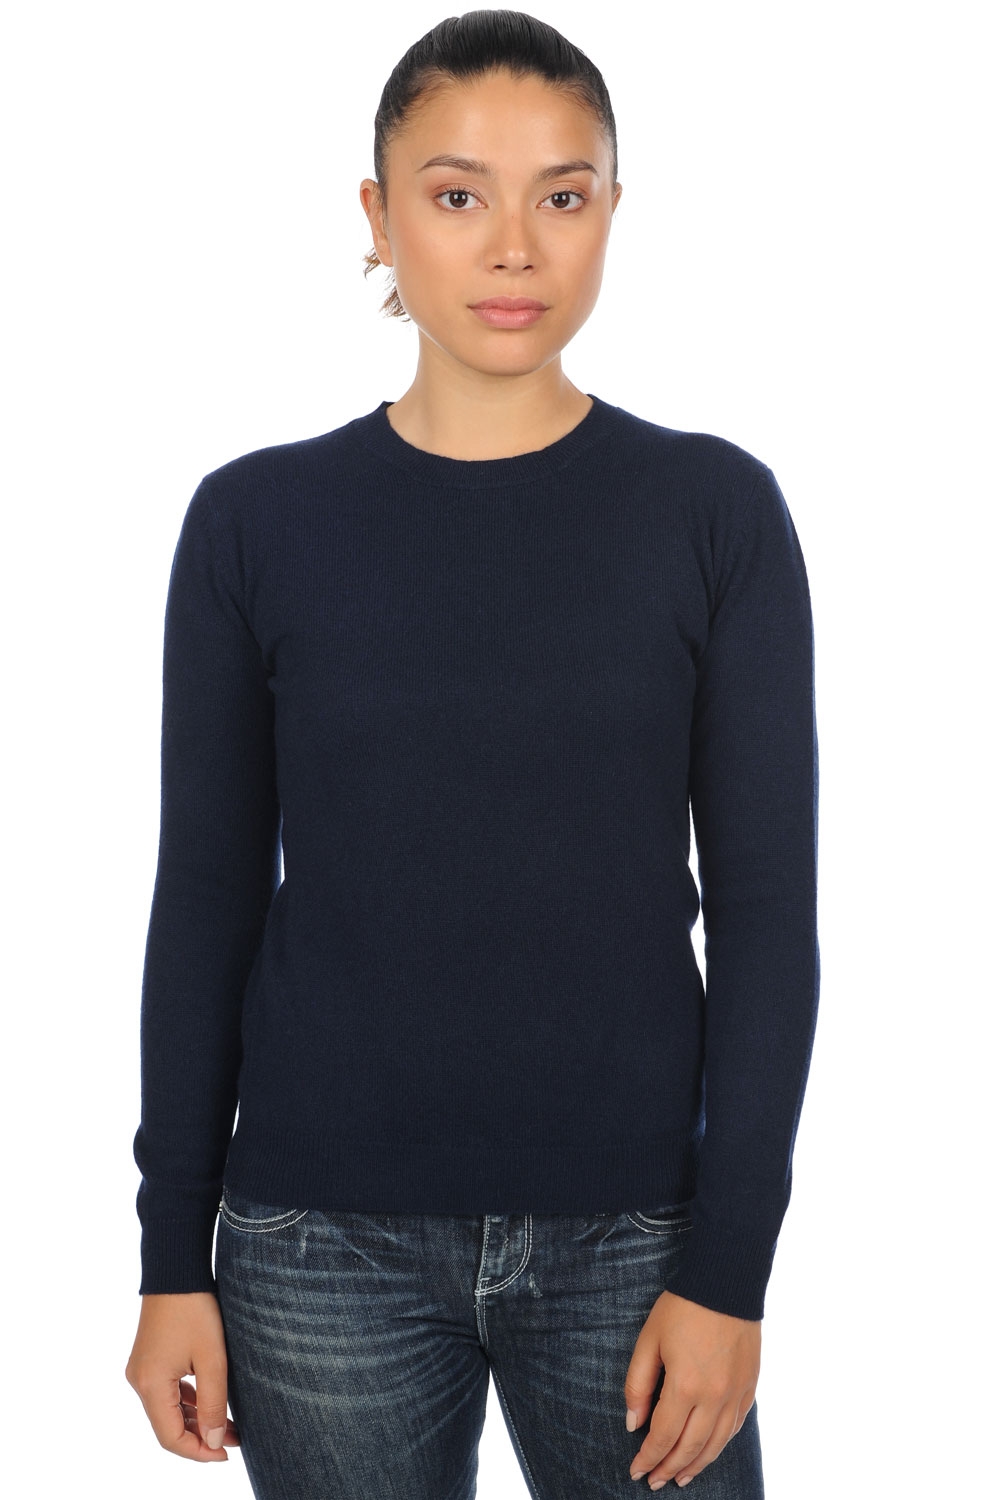 Cashmere ladies basic sweaters at low prices thalia first dress blue 2xl